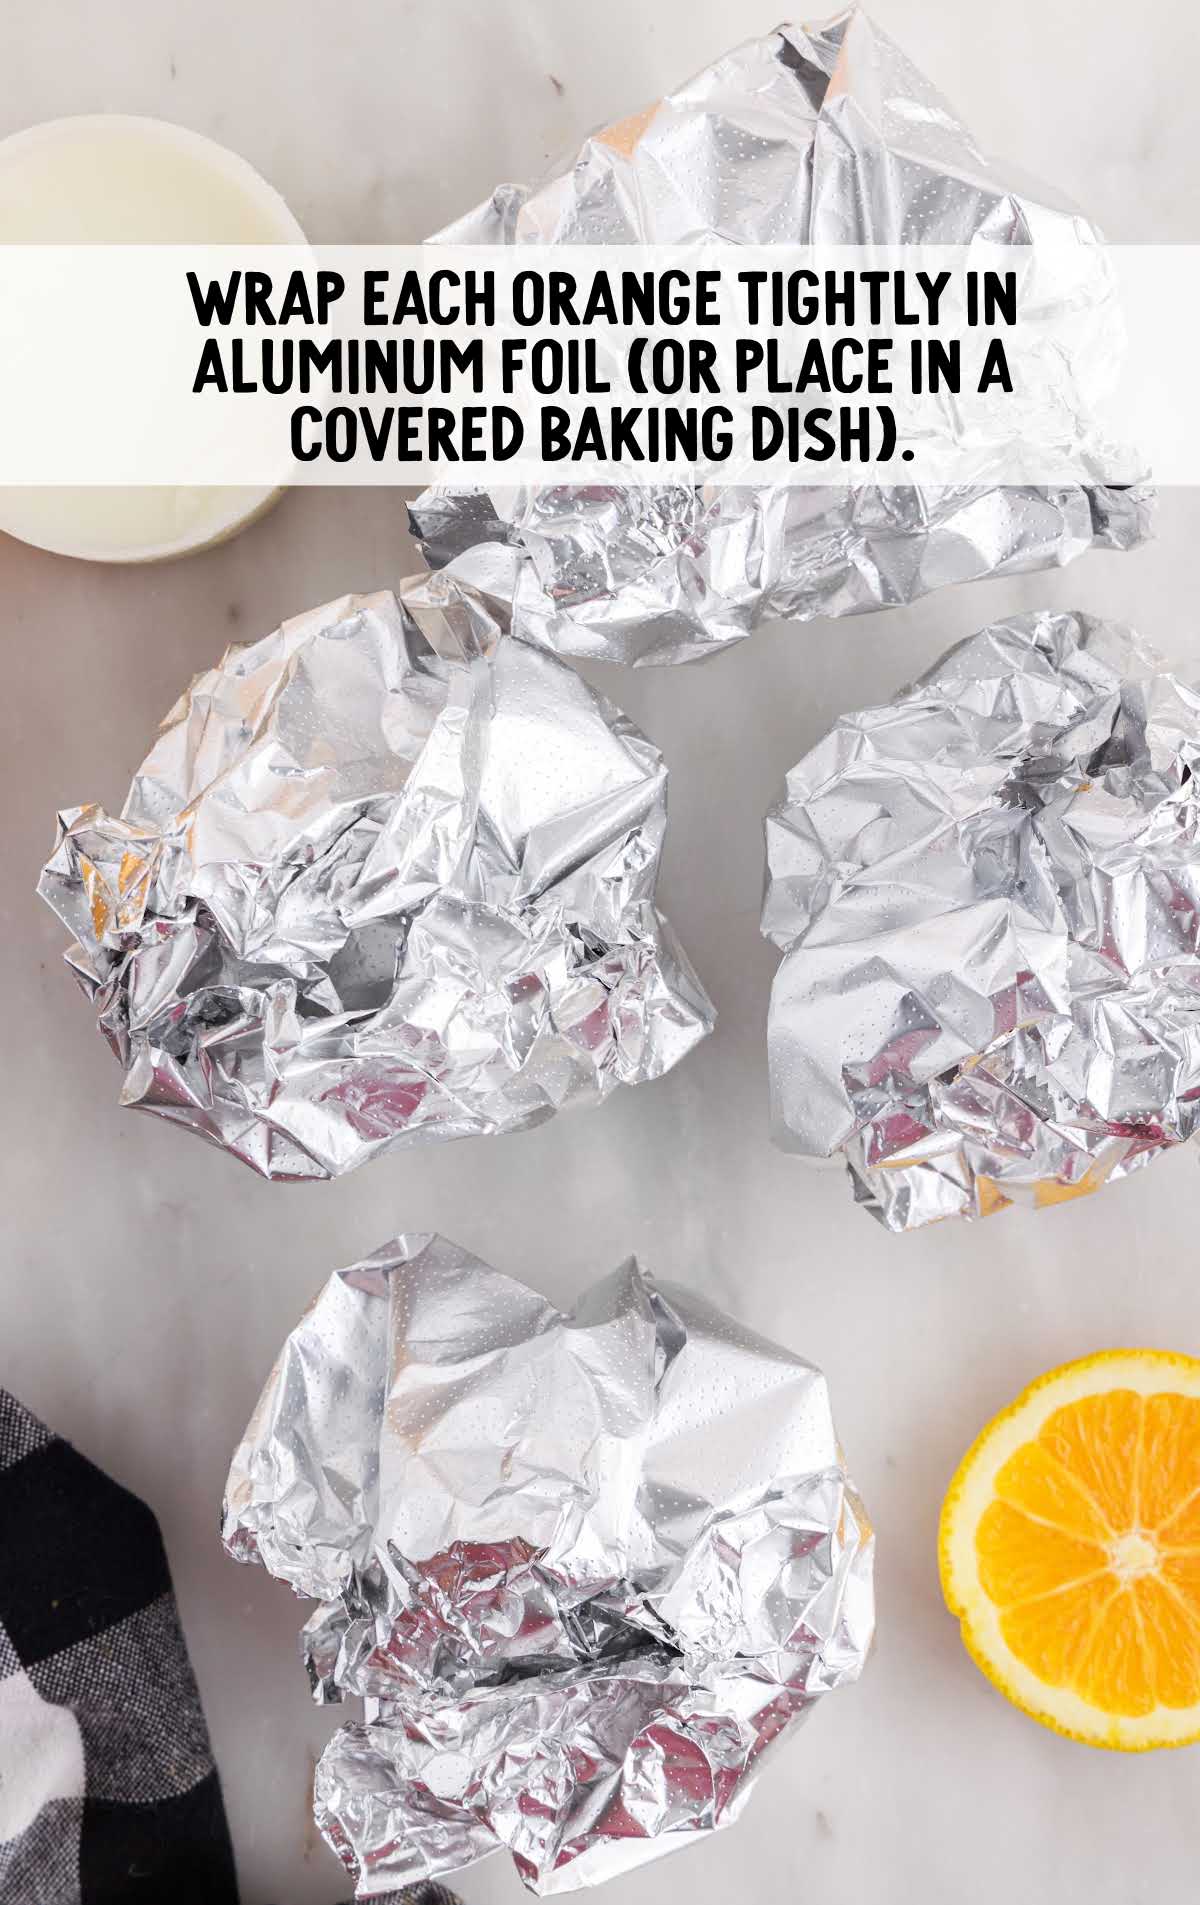 oranges wrapped tightly with aluminum foil